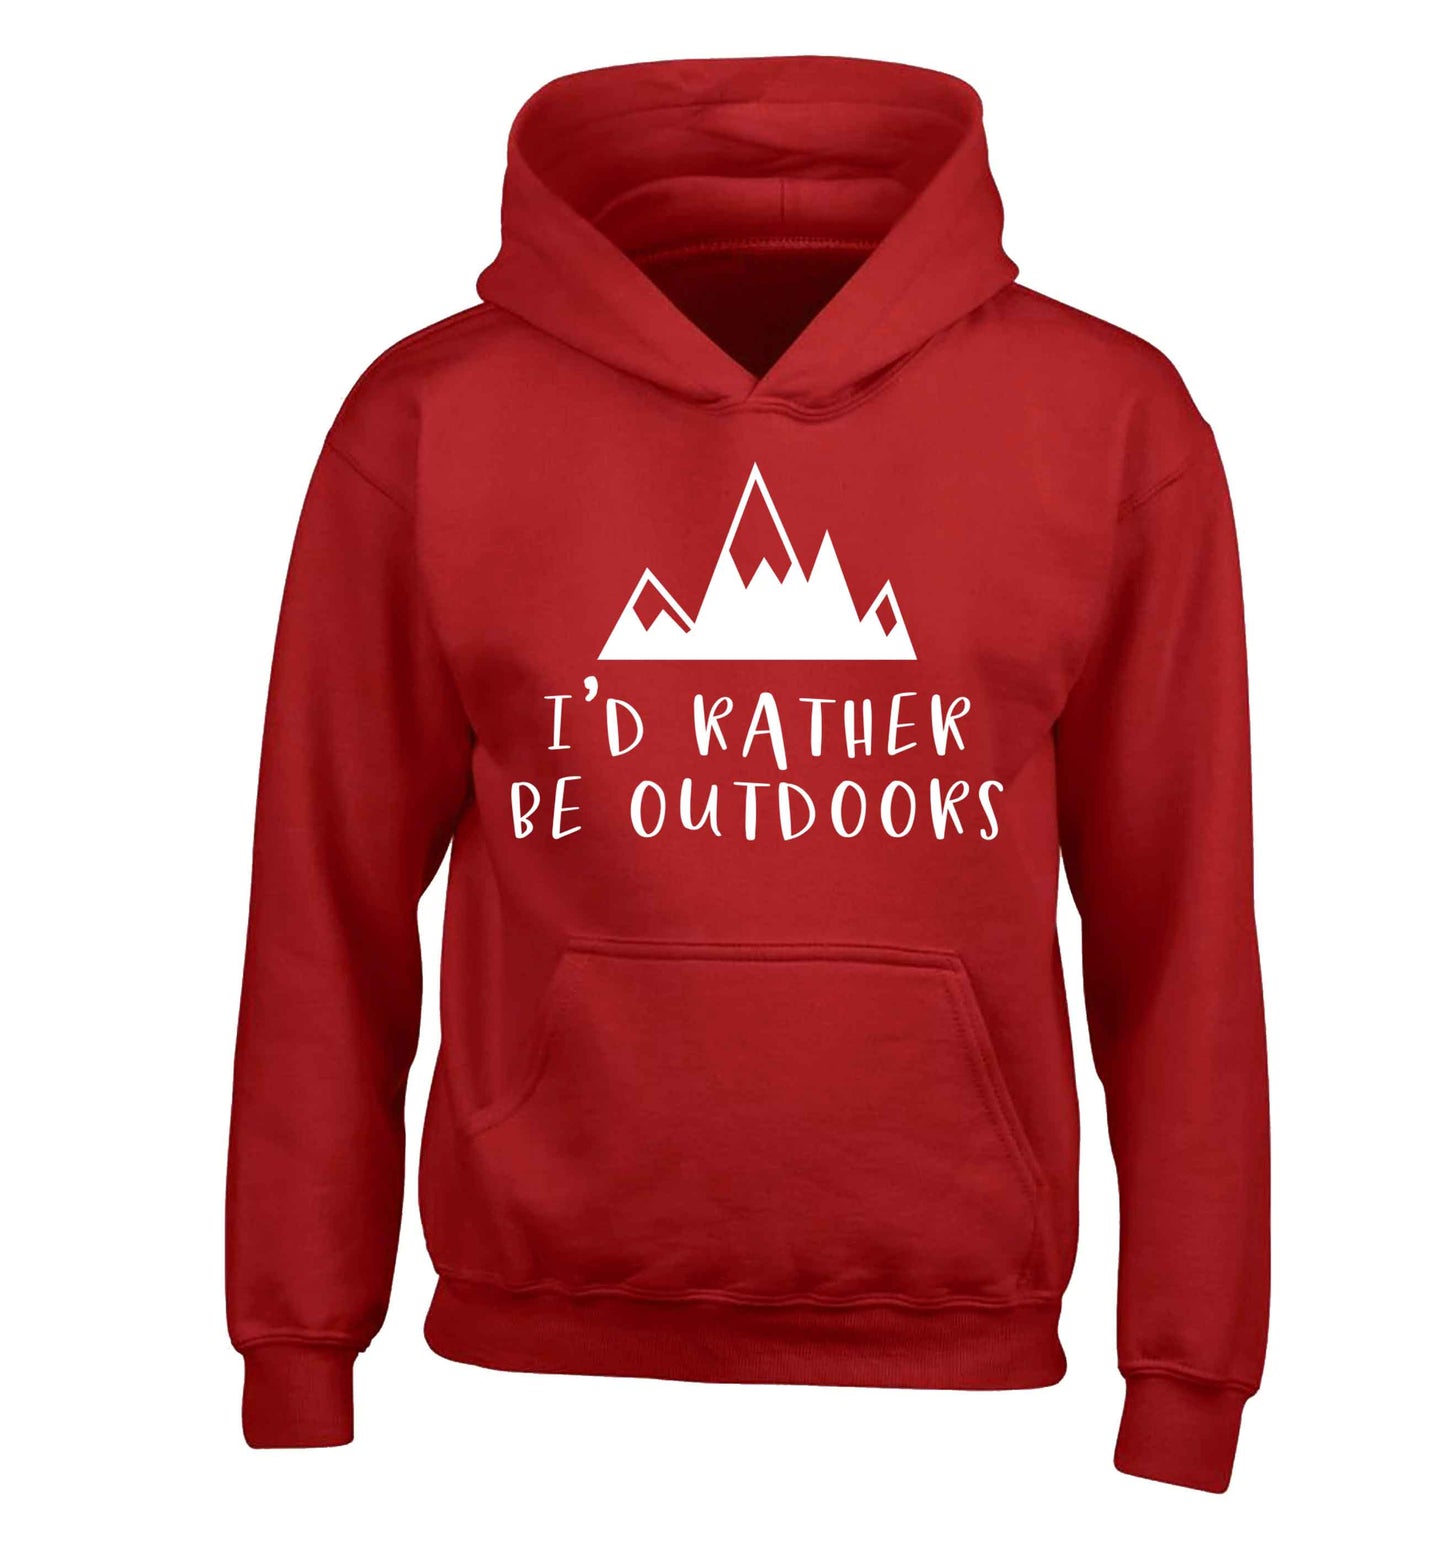 I'd rather be outdoors children's red hoodie 12-13 Years